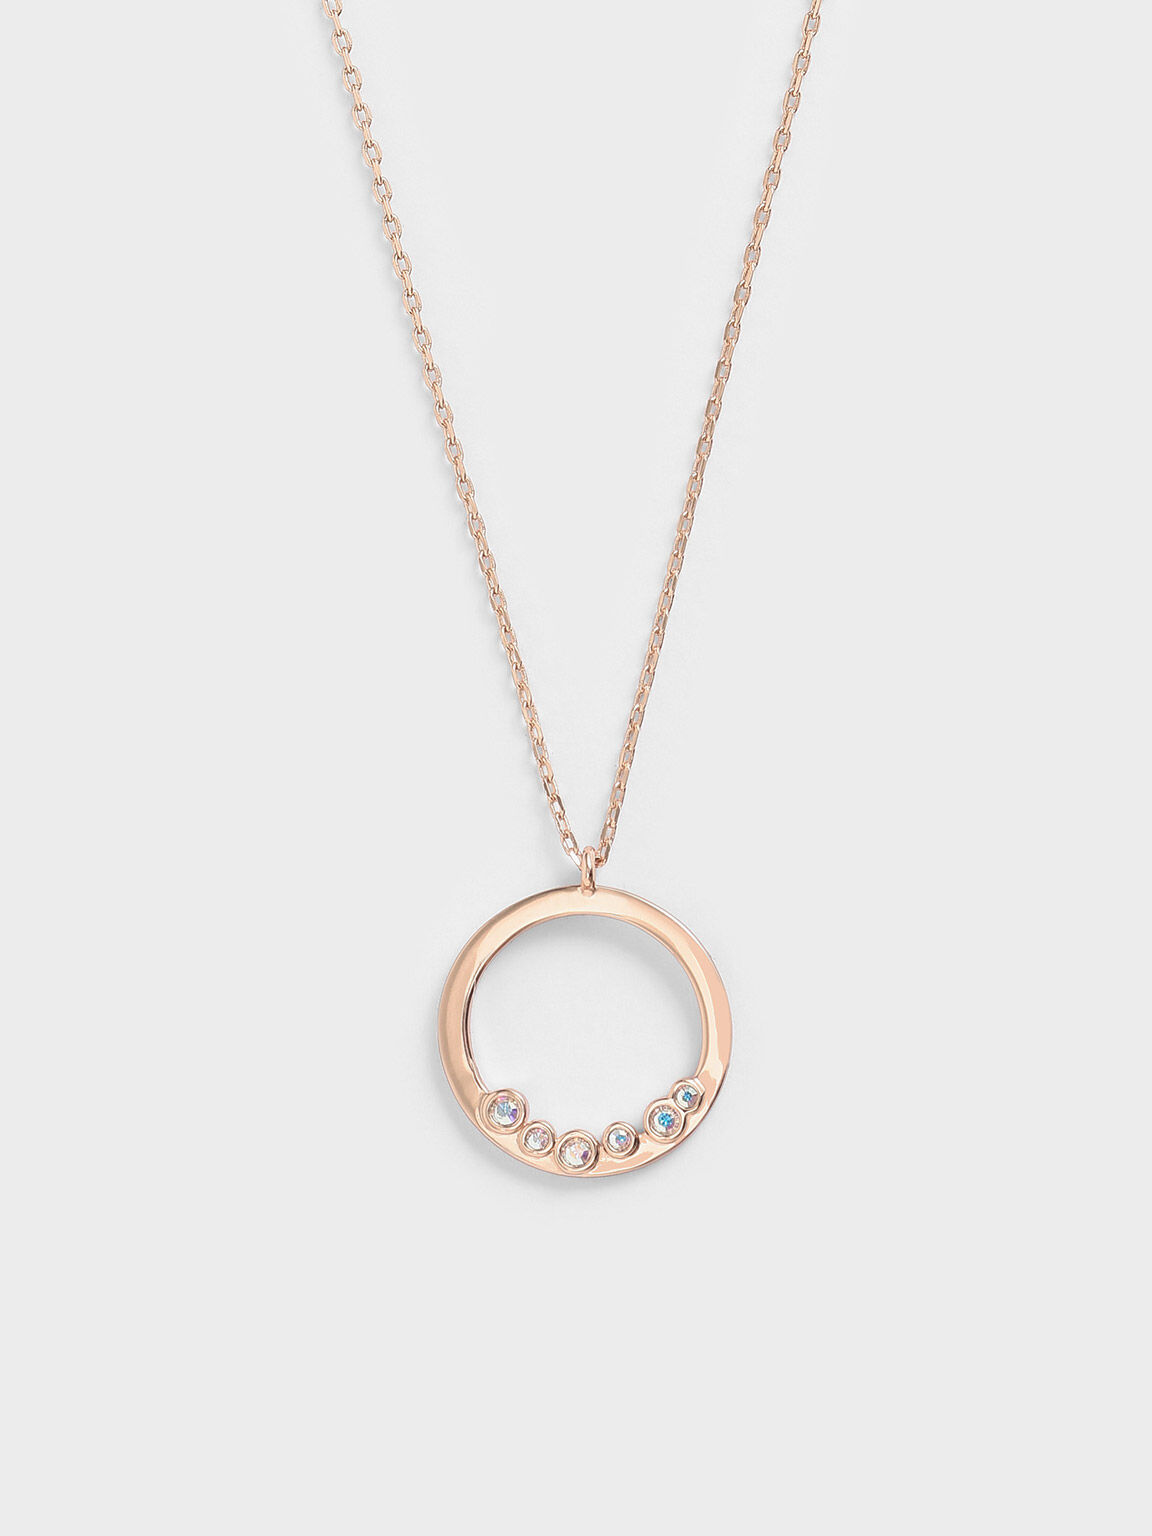 Daughter-In-Law Gift Necklace: Wedding Gift, Jewelry From Mother-In Law,  Gift for Bride, Stacked Circles - Dear Ava